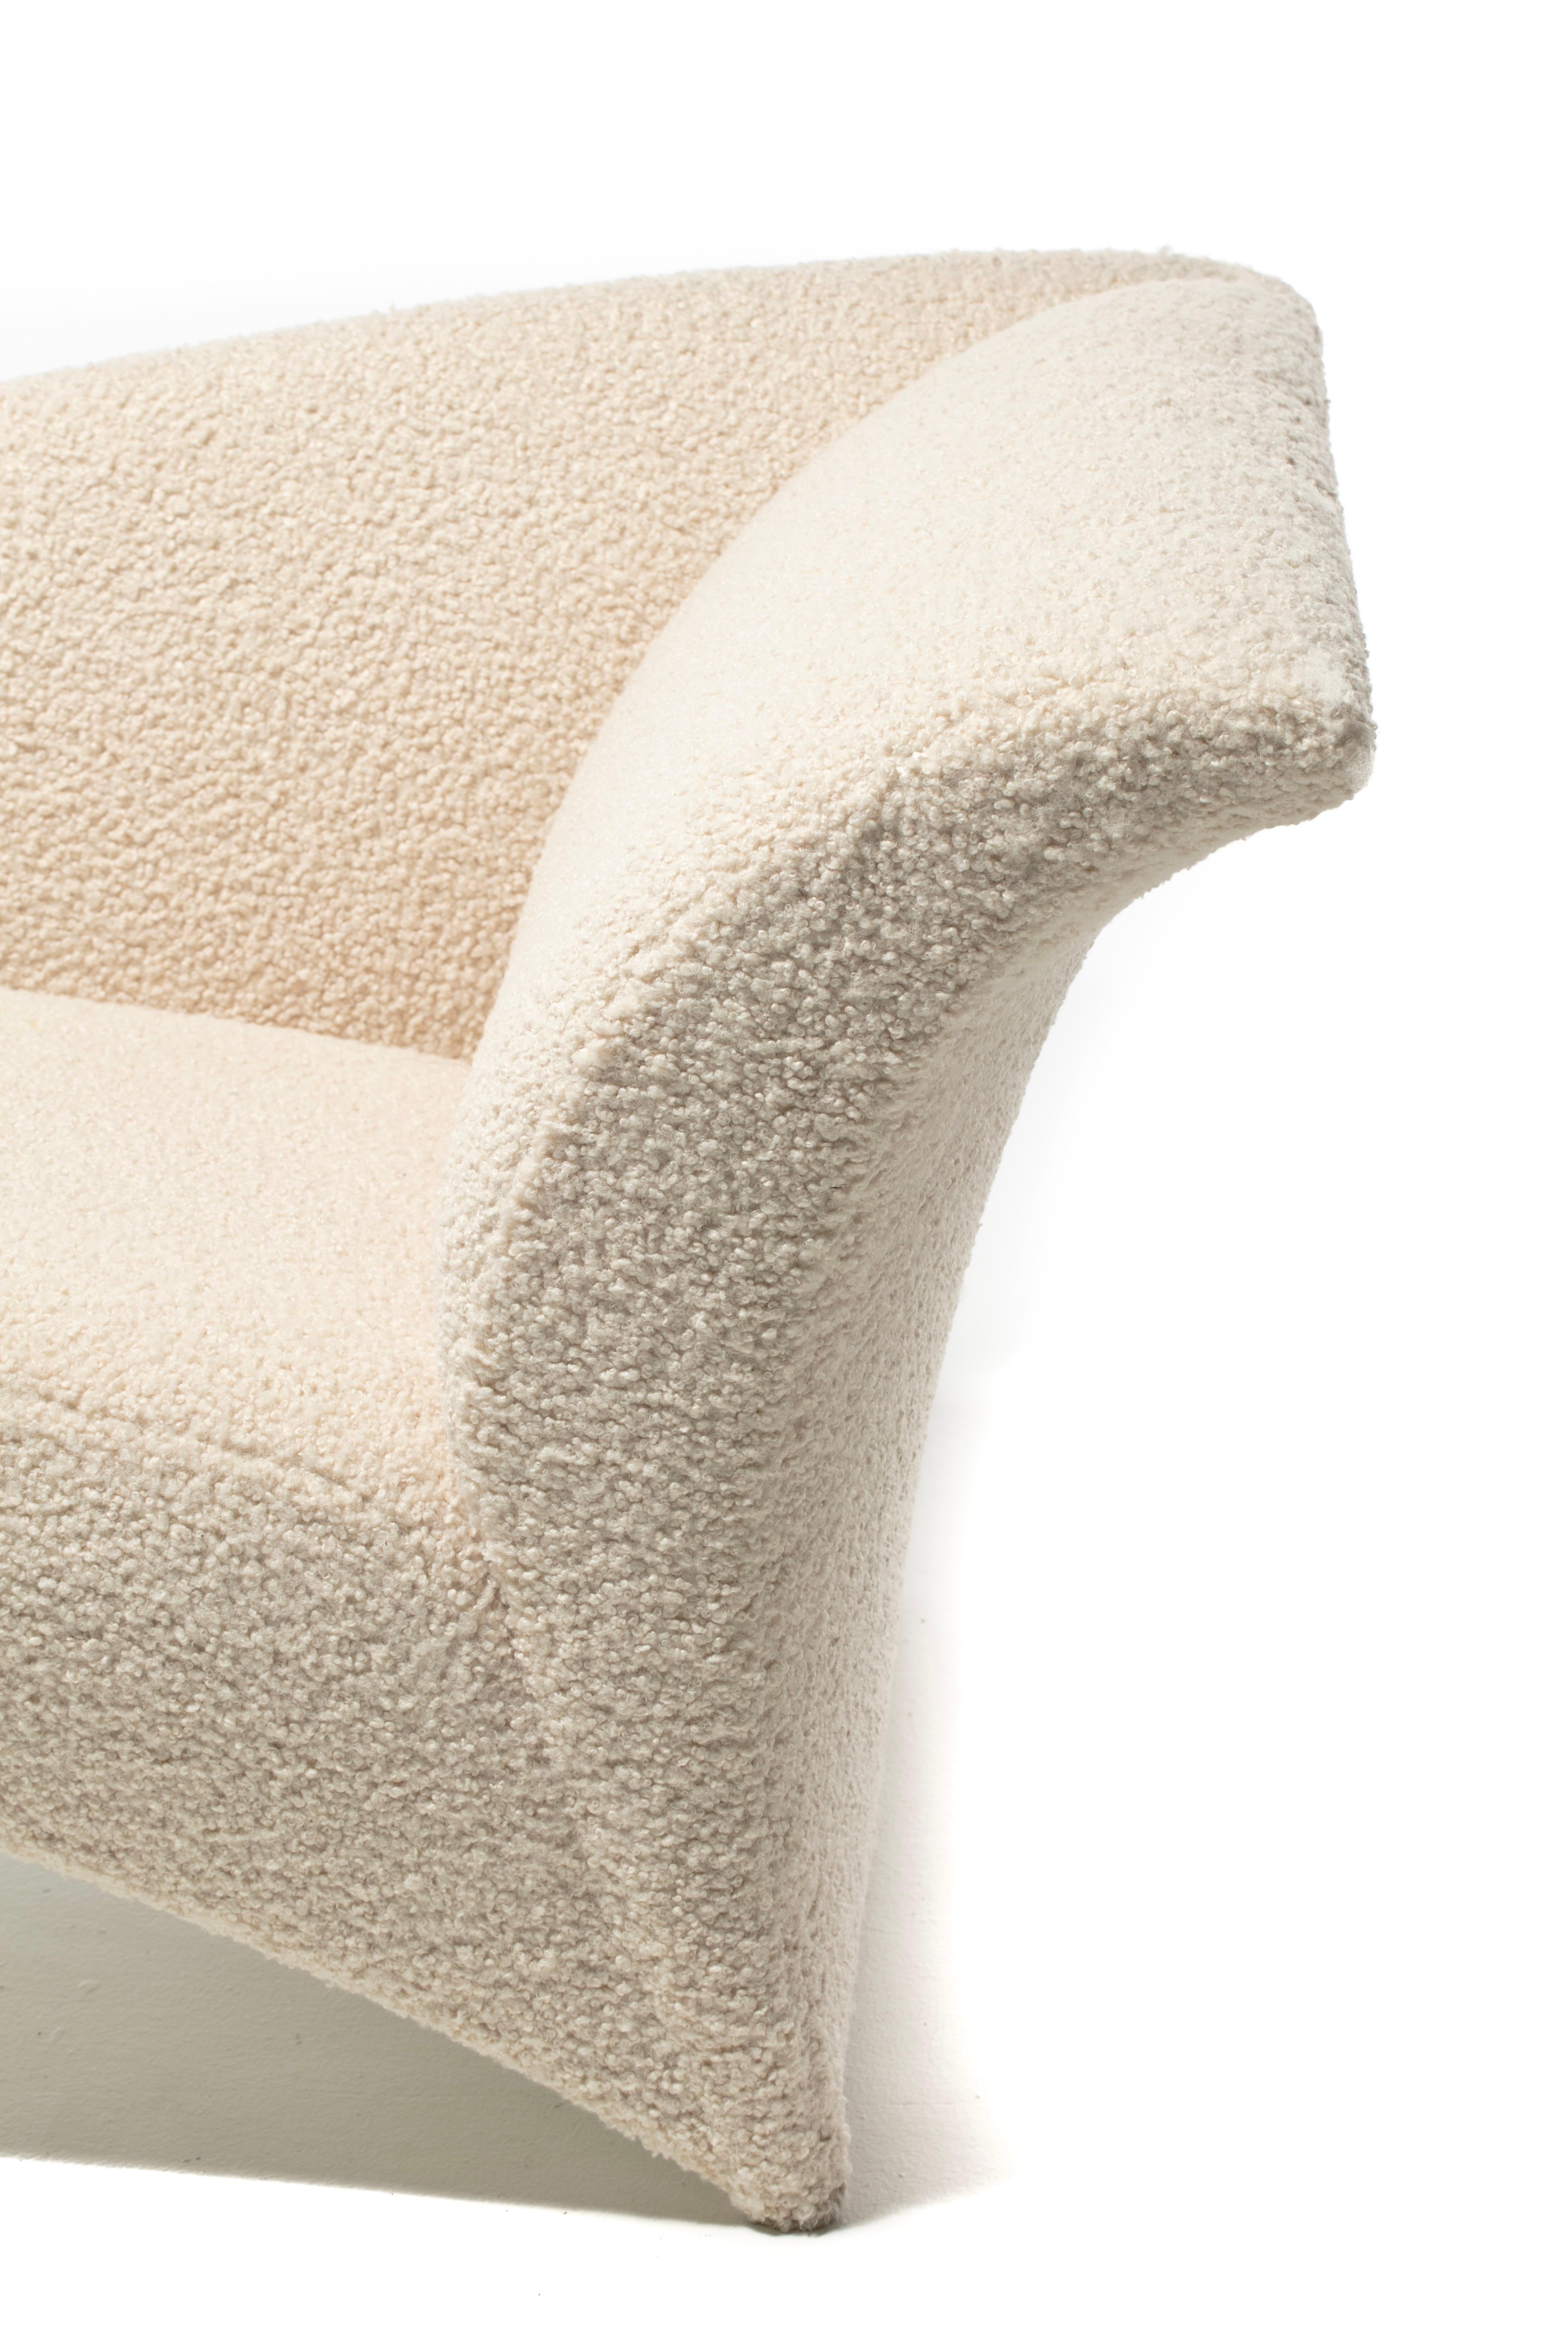 Vladimir Kagan Post Modern Marilyn Chaise Lounge in Ivory White Bouclé c. 1986 For Sale 4